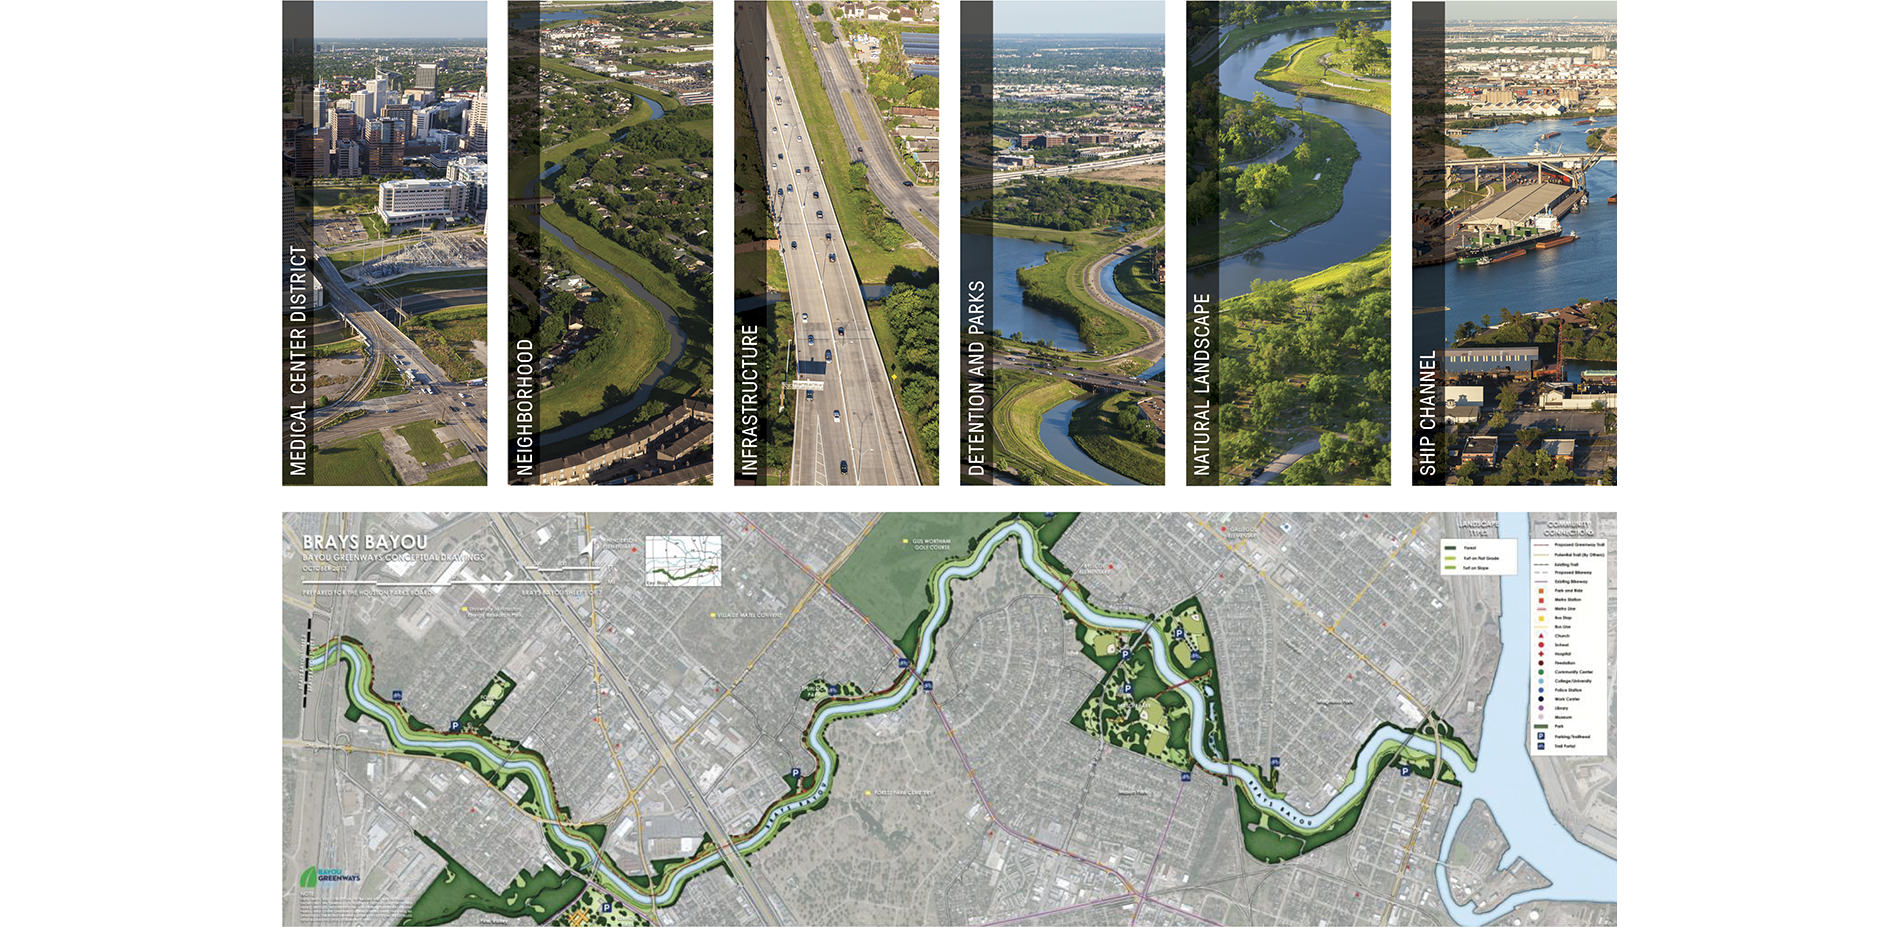 Images and Map of Various Brays Bayou Locations